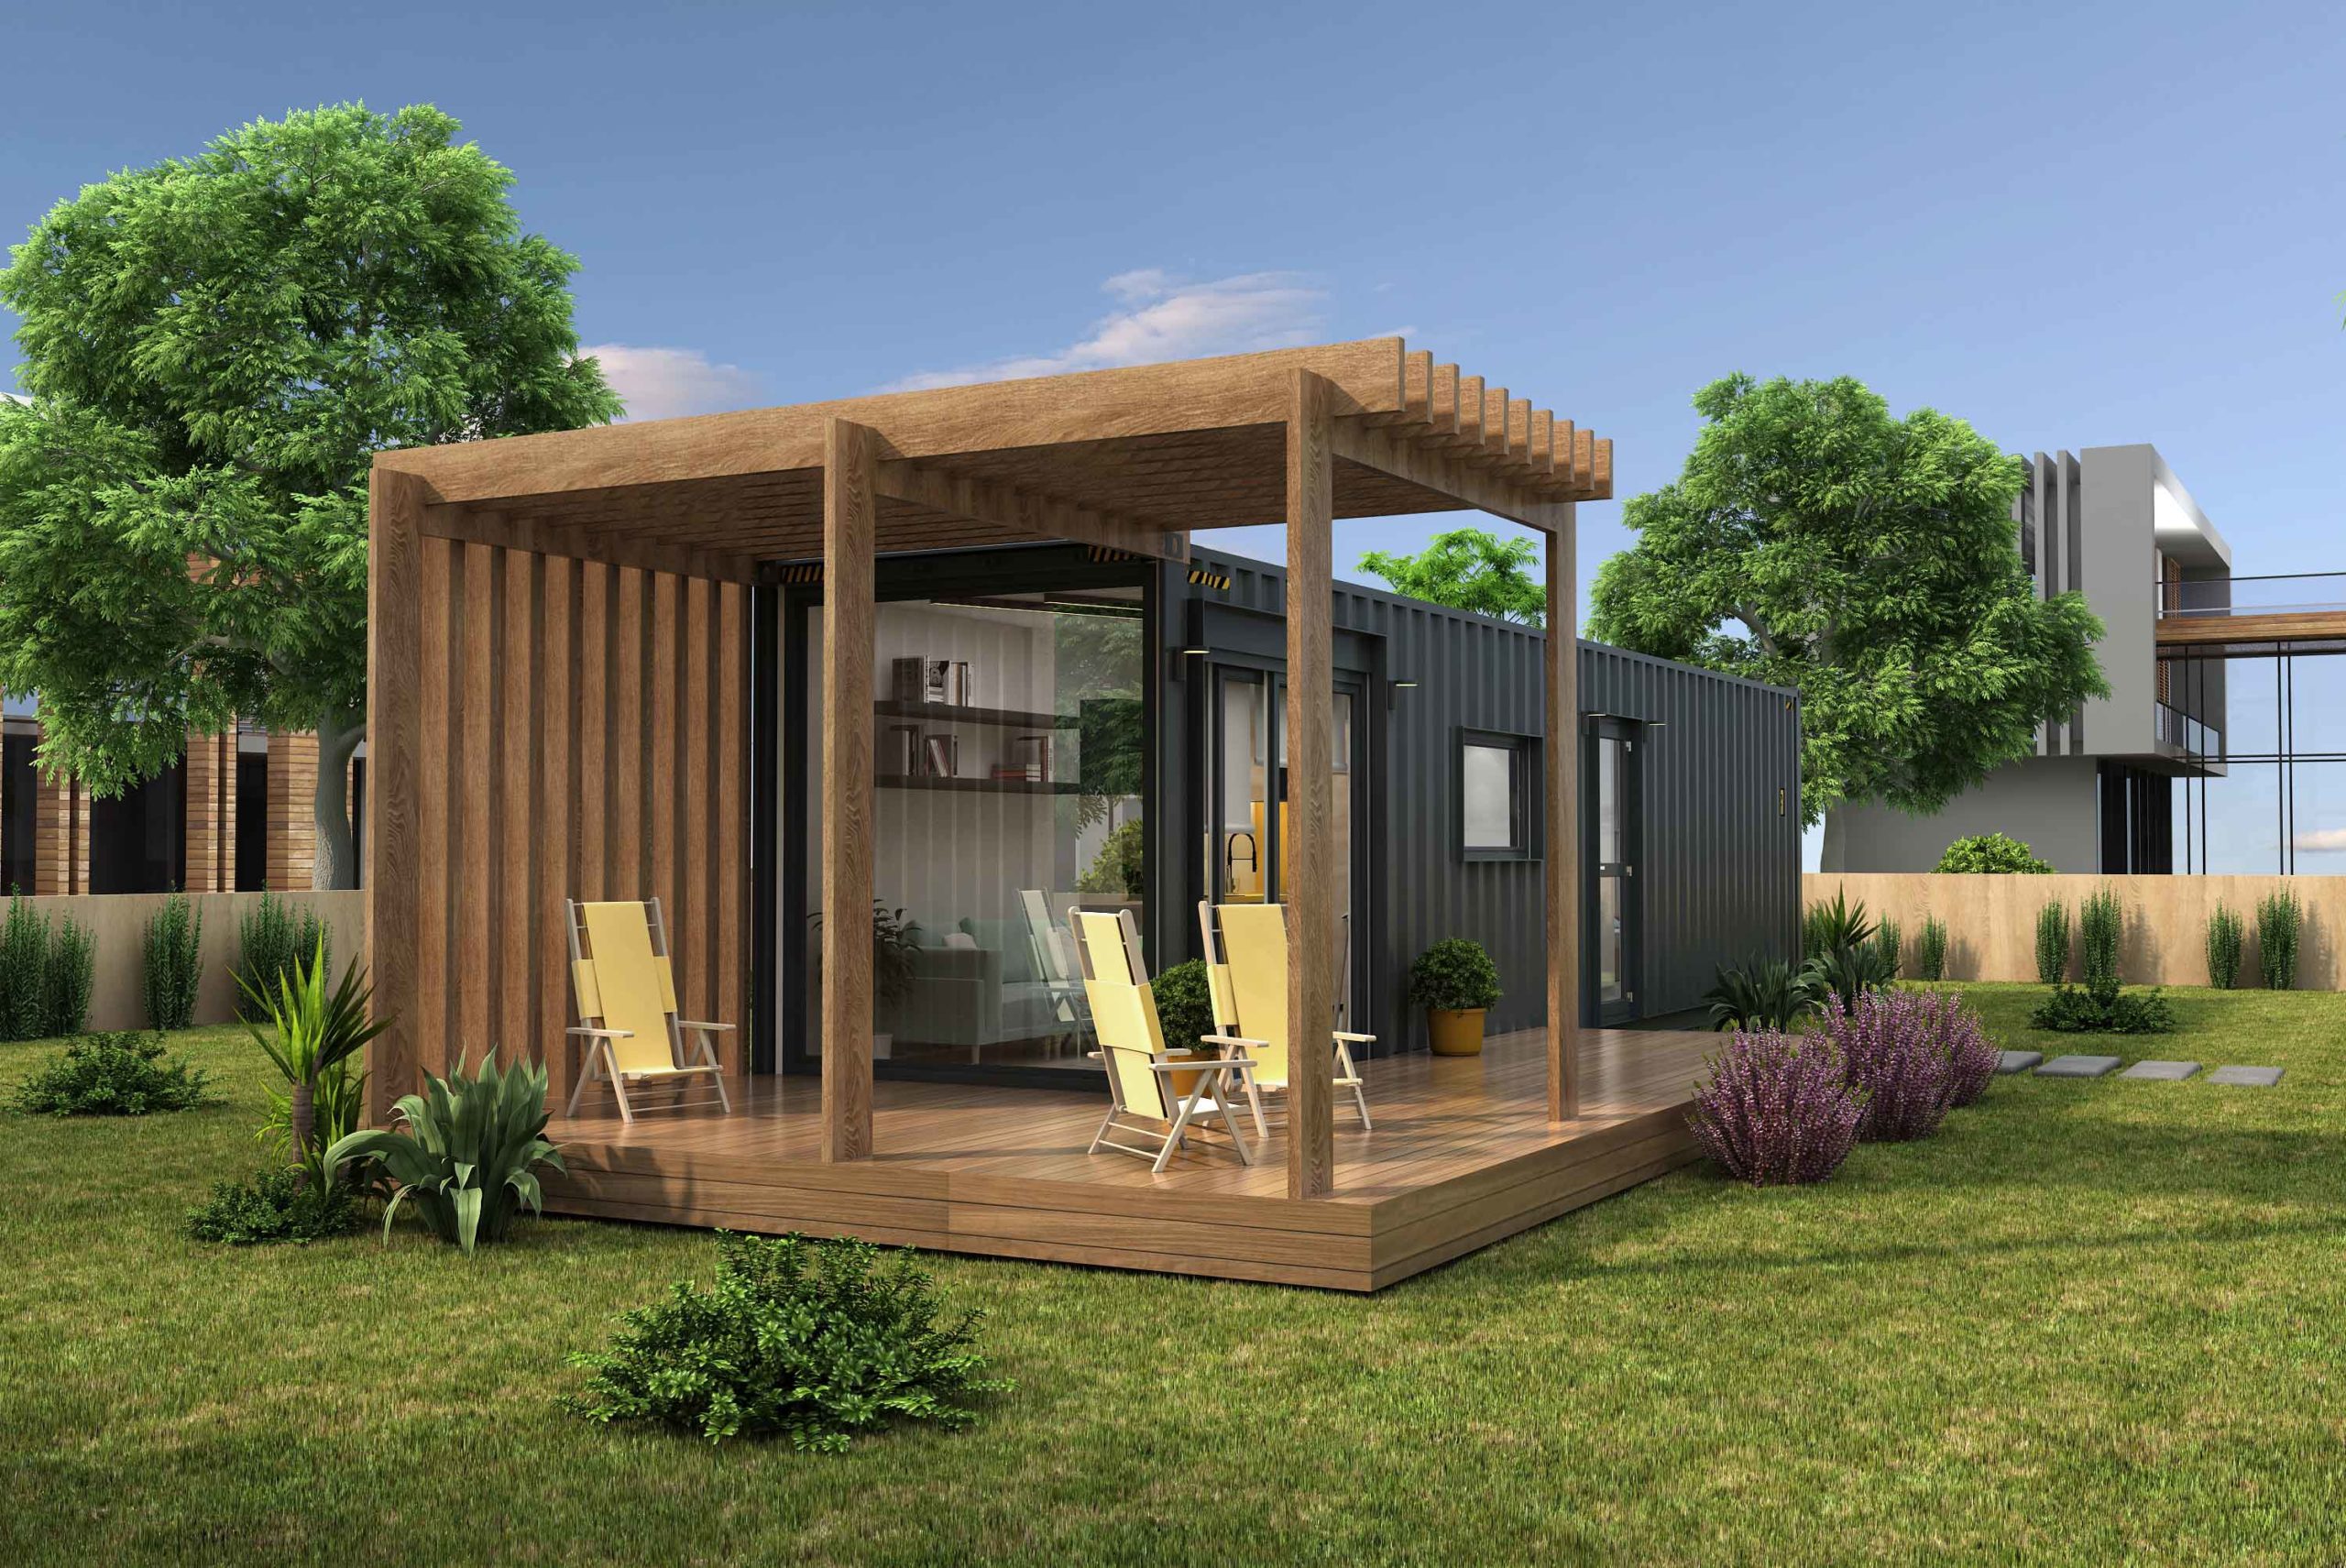 Creating a Shipping Container Garage - Land Containers